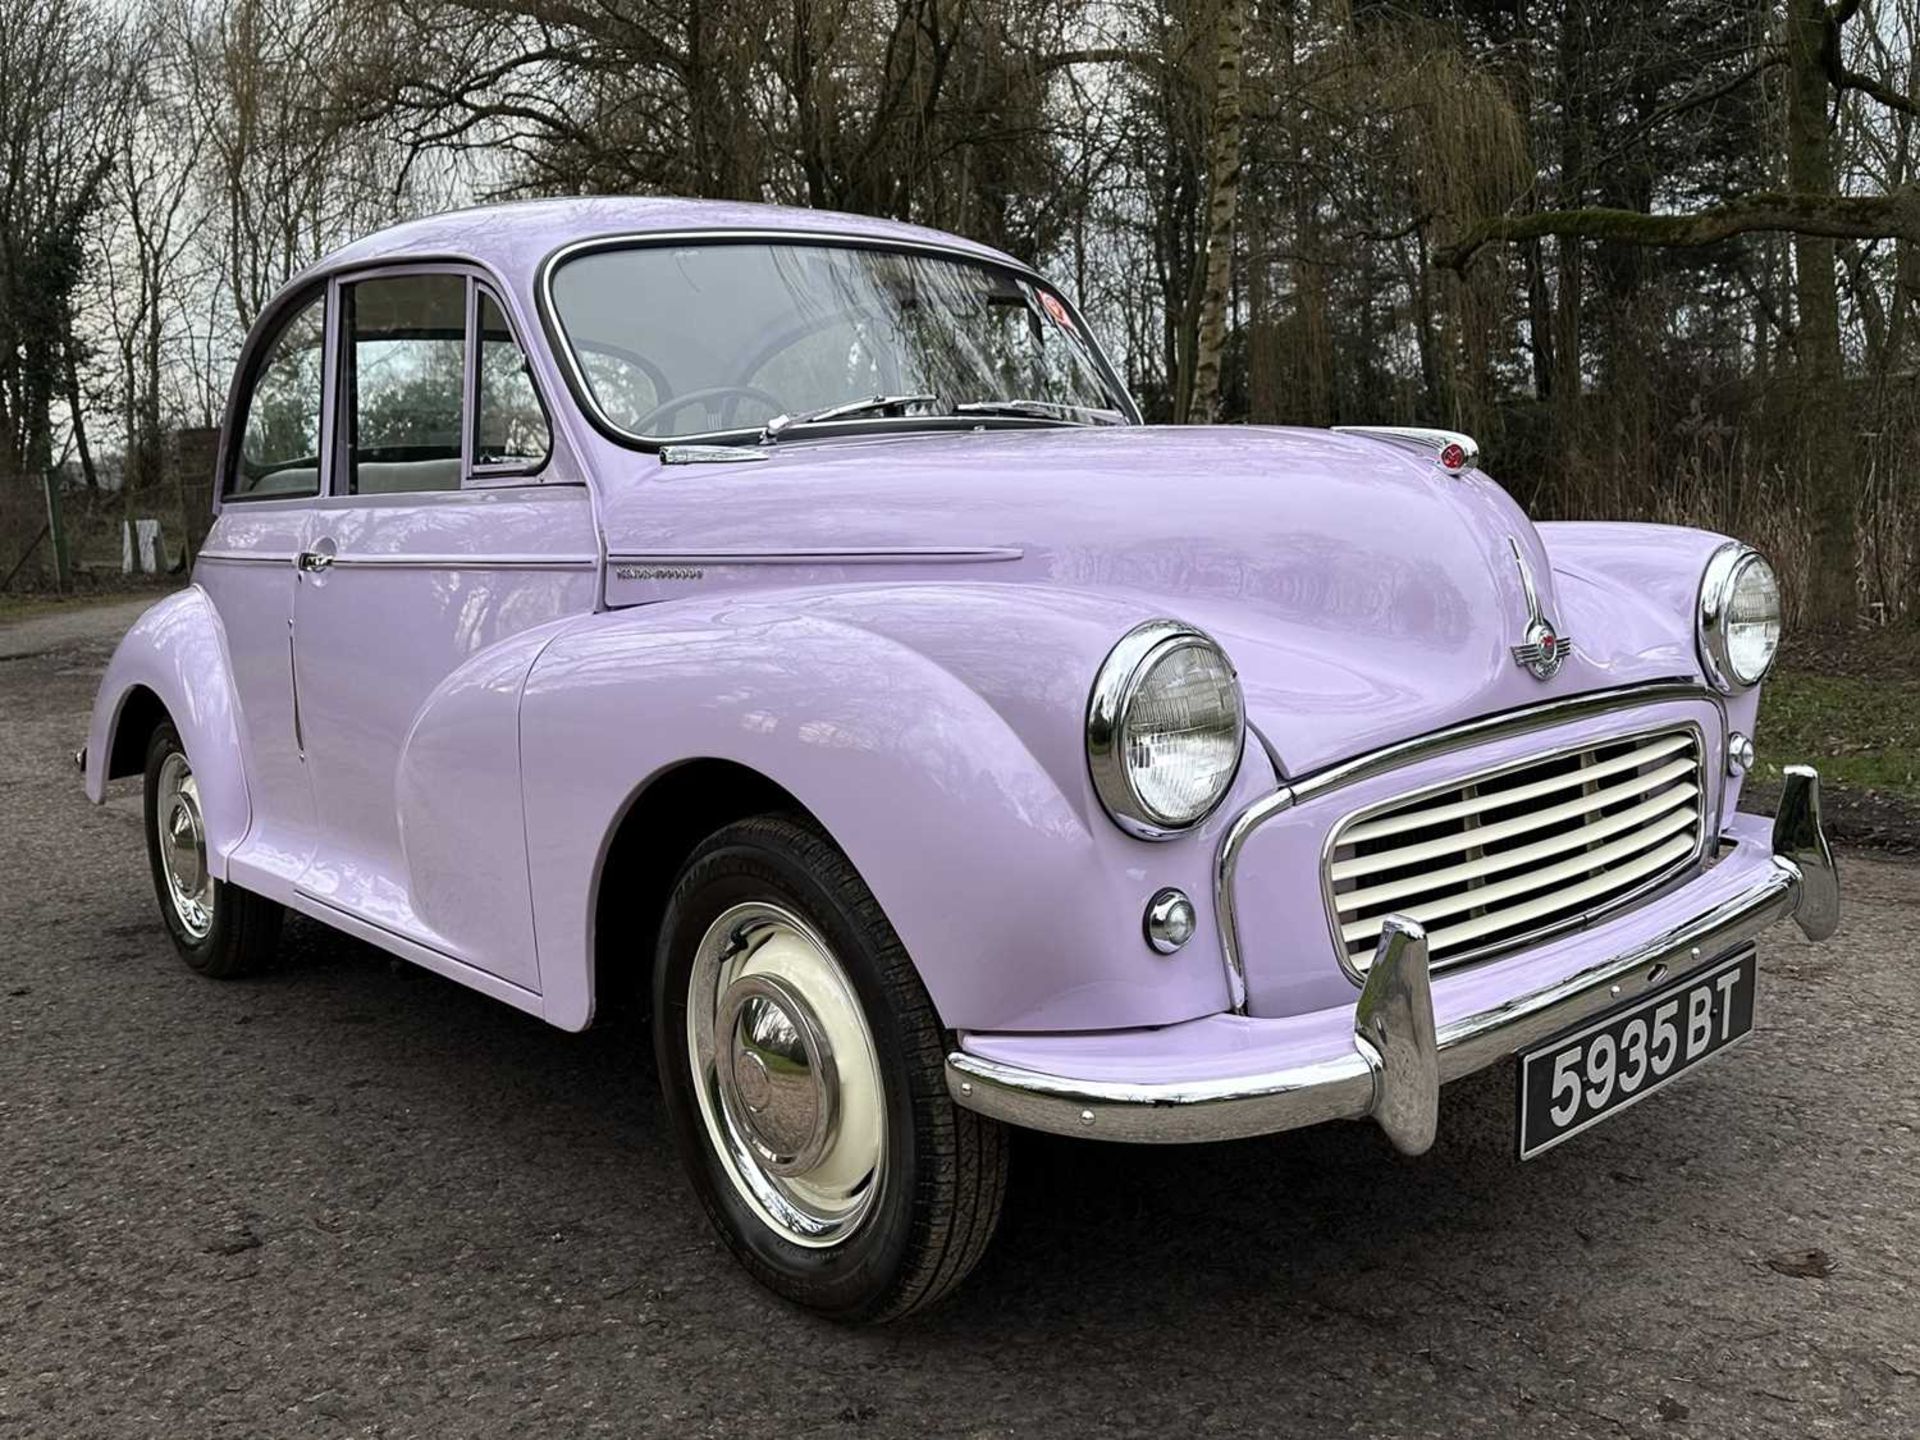 1961 Morris Minor Million 179 of 350 built, fully restored, only three owners from new - Image 2 of 100